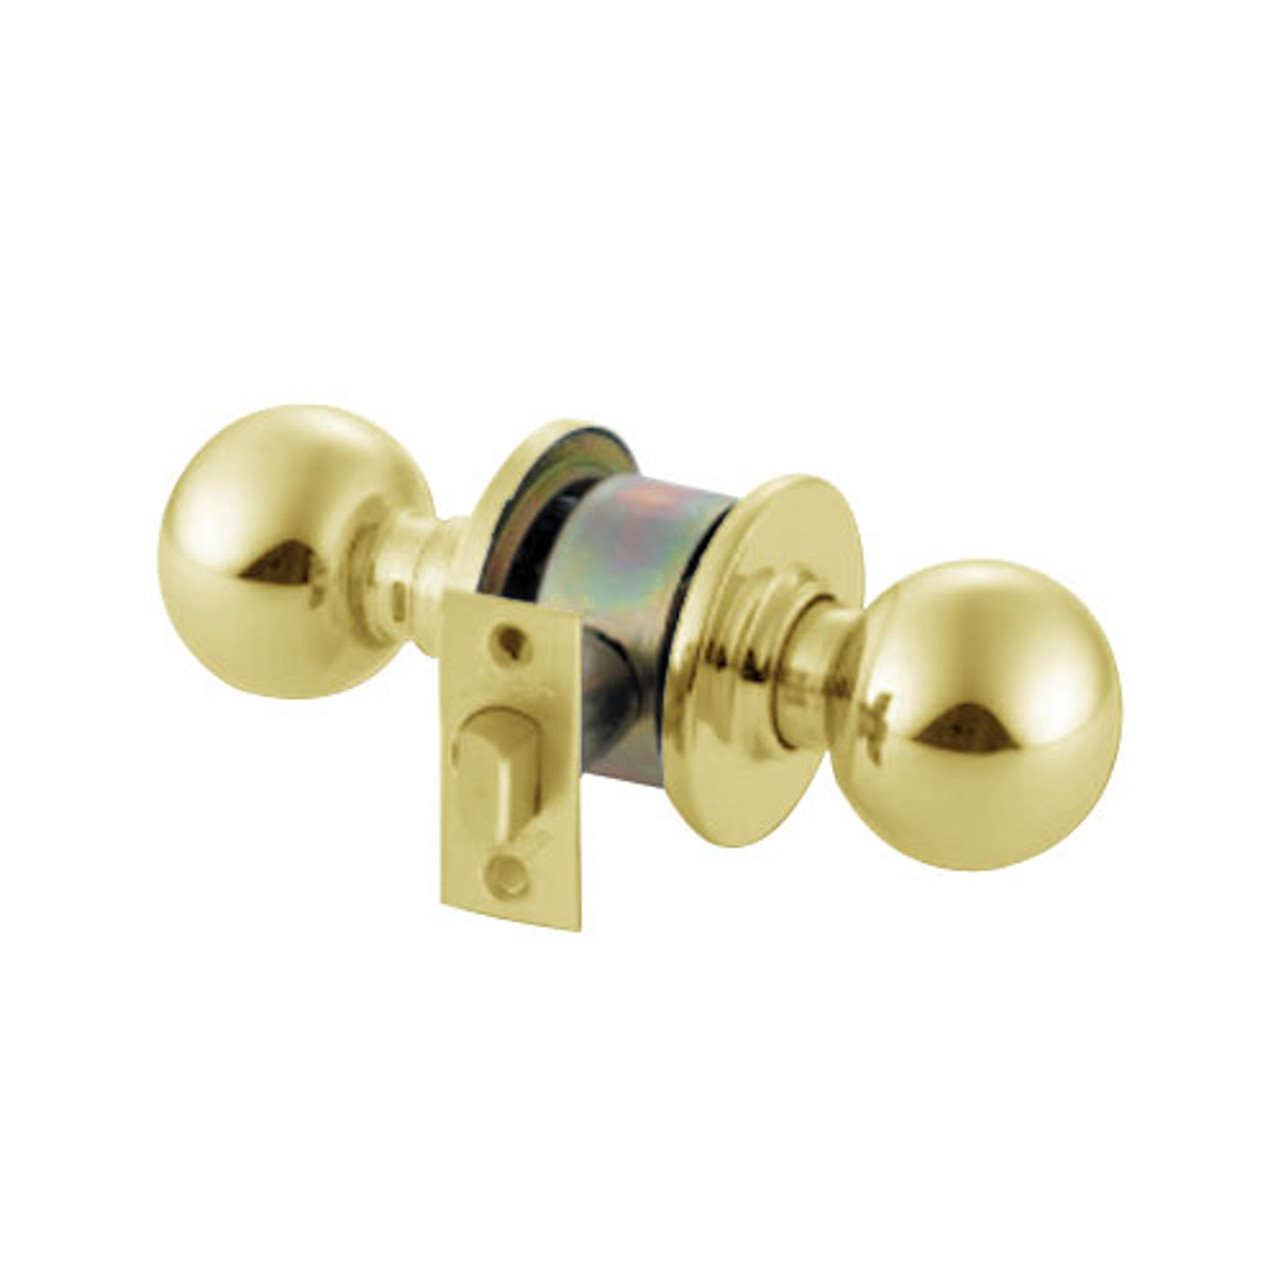 MK02-BD-04 Arrow Lock MK Series Non Keyed Cylindrical Locksets for Privacy with BD Knob in Satin Brass Finish